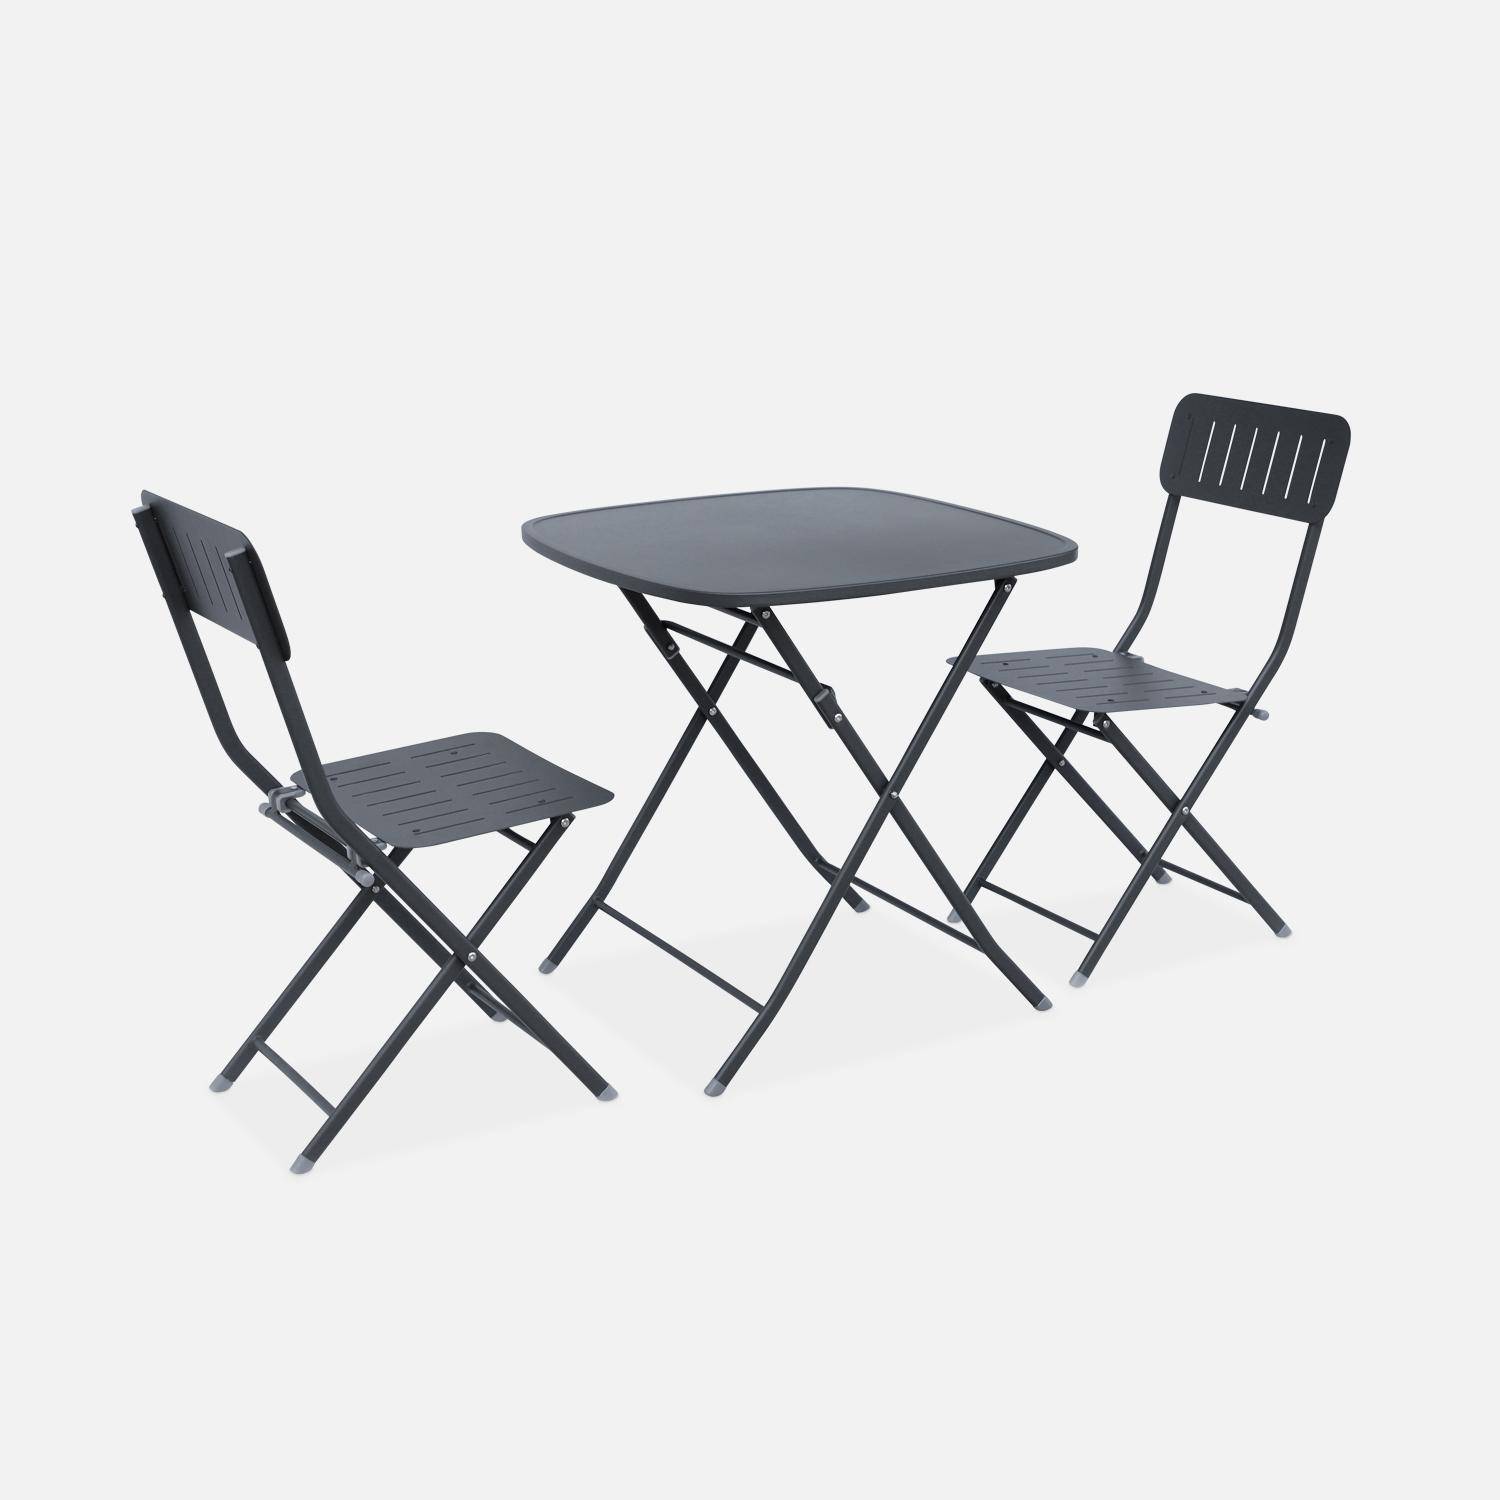 Folding bistro-style garden table in anthracite with 2 folding chairs in sturdy galvanised steel Photo3